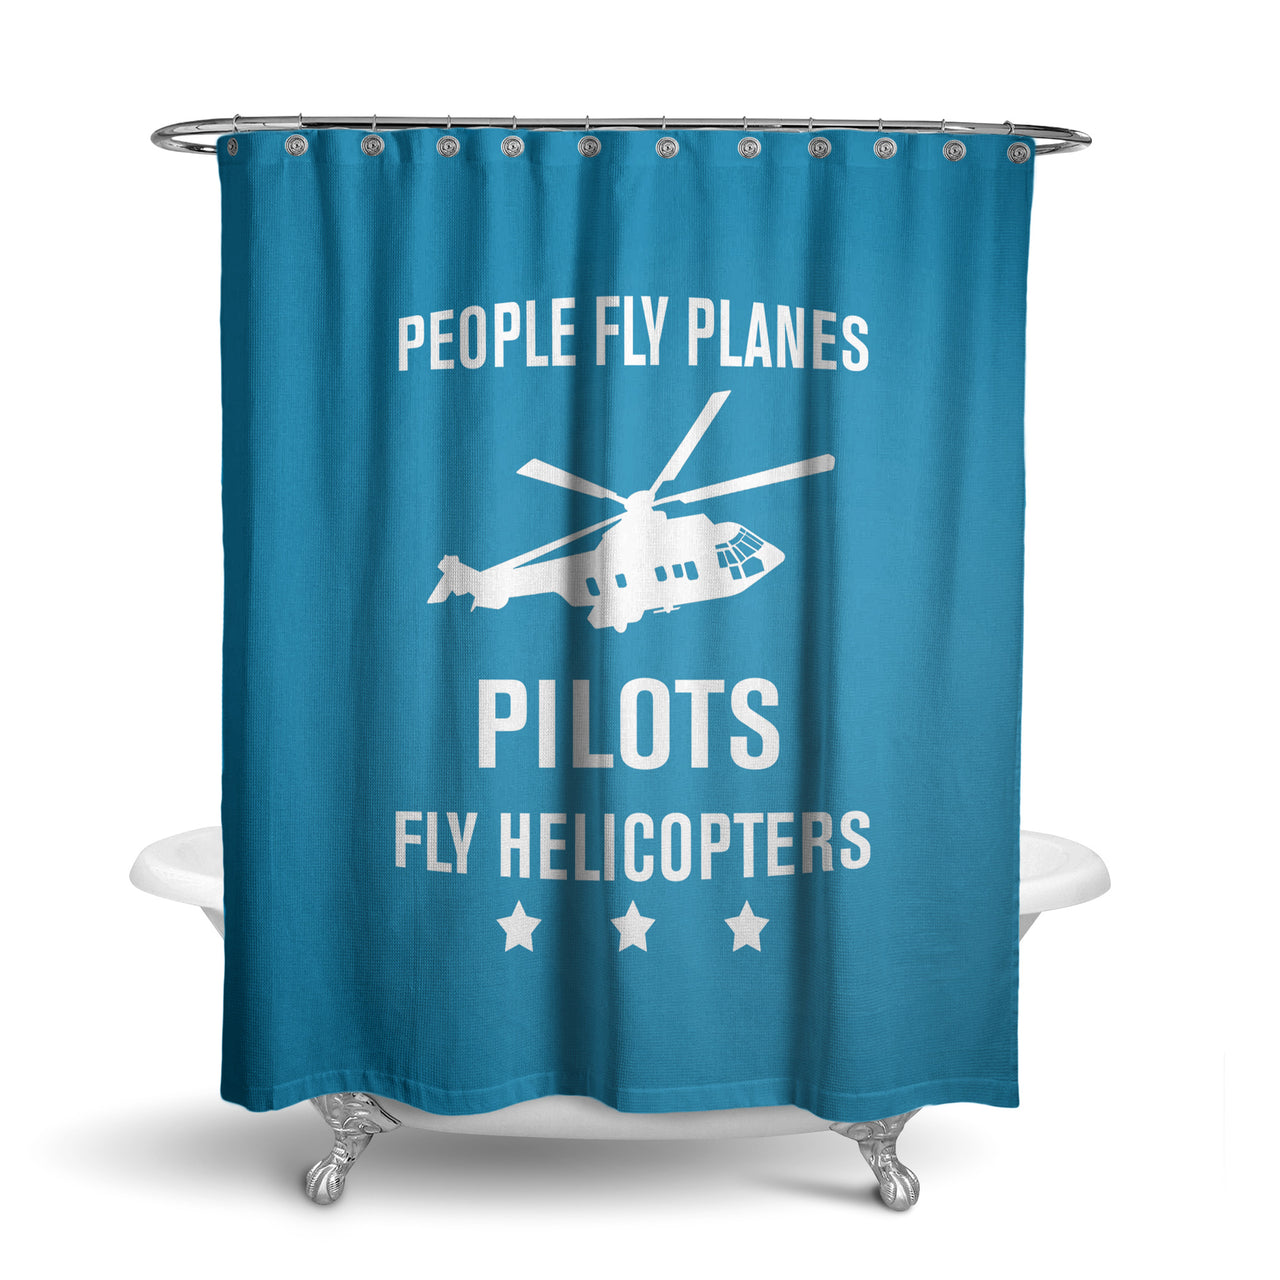 People Fly Planes Pilots Fly Helicopters Designed Shower Curtains